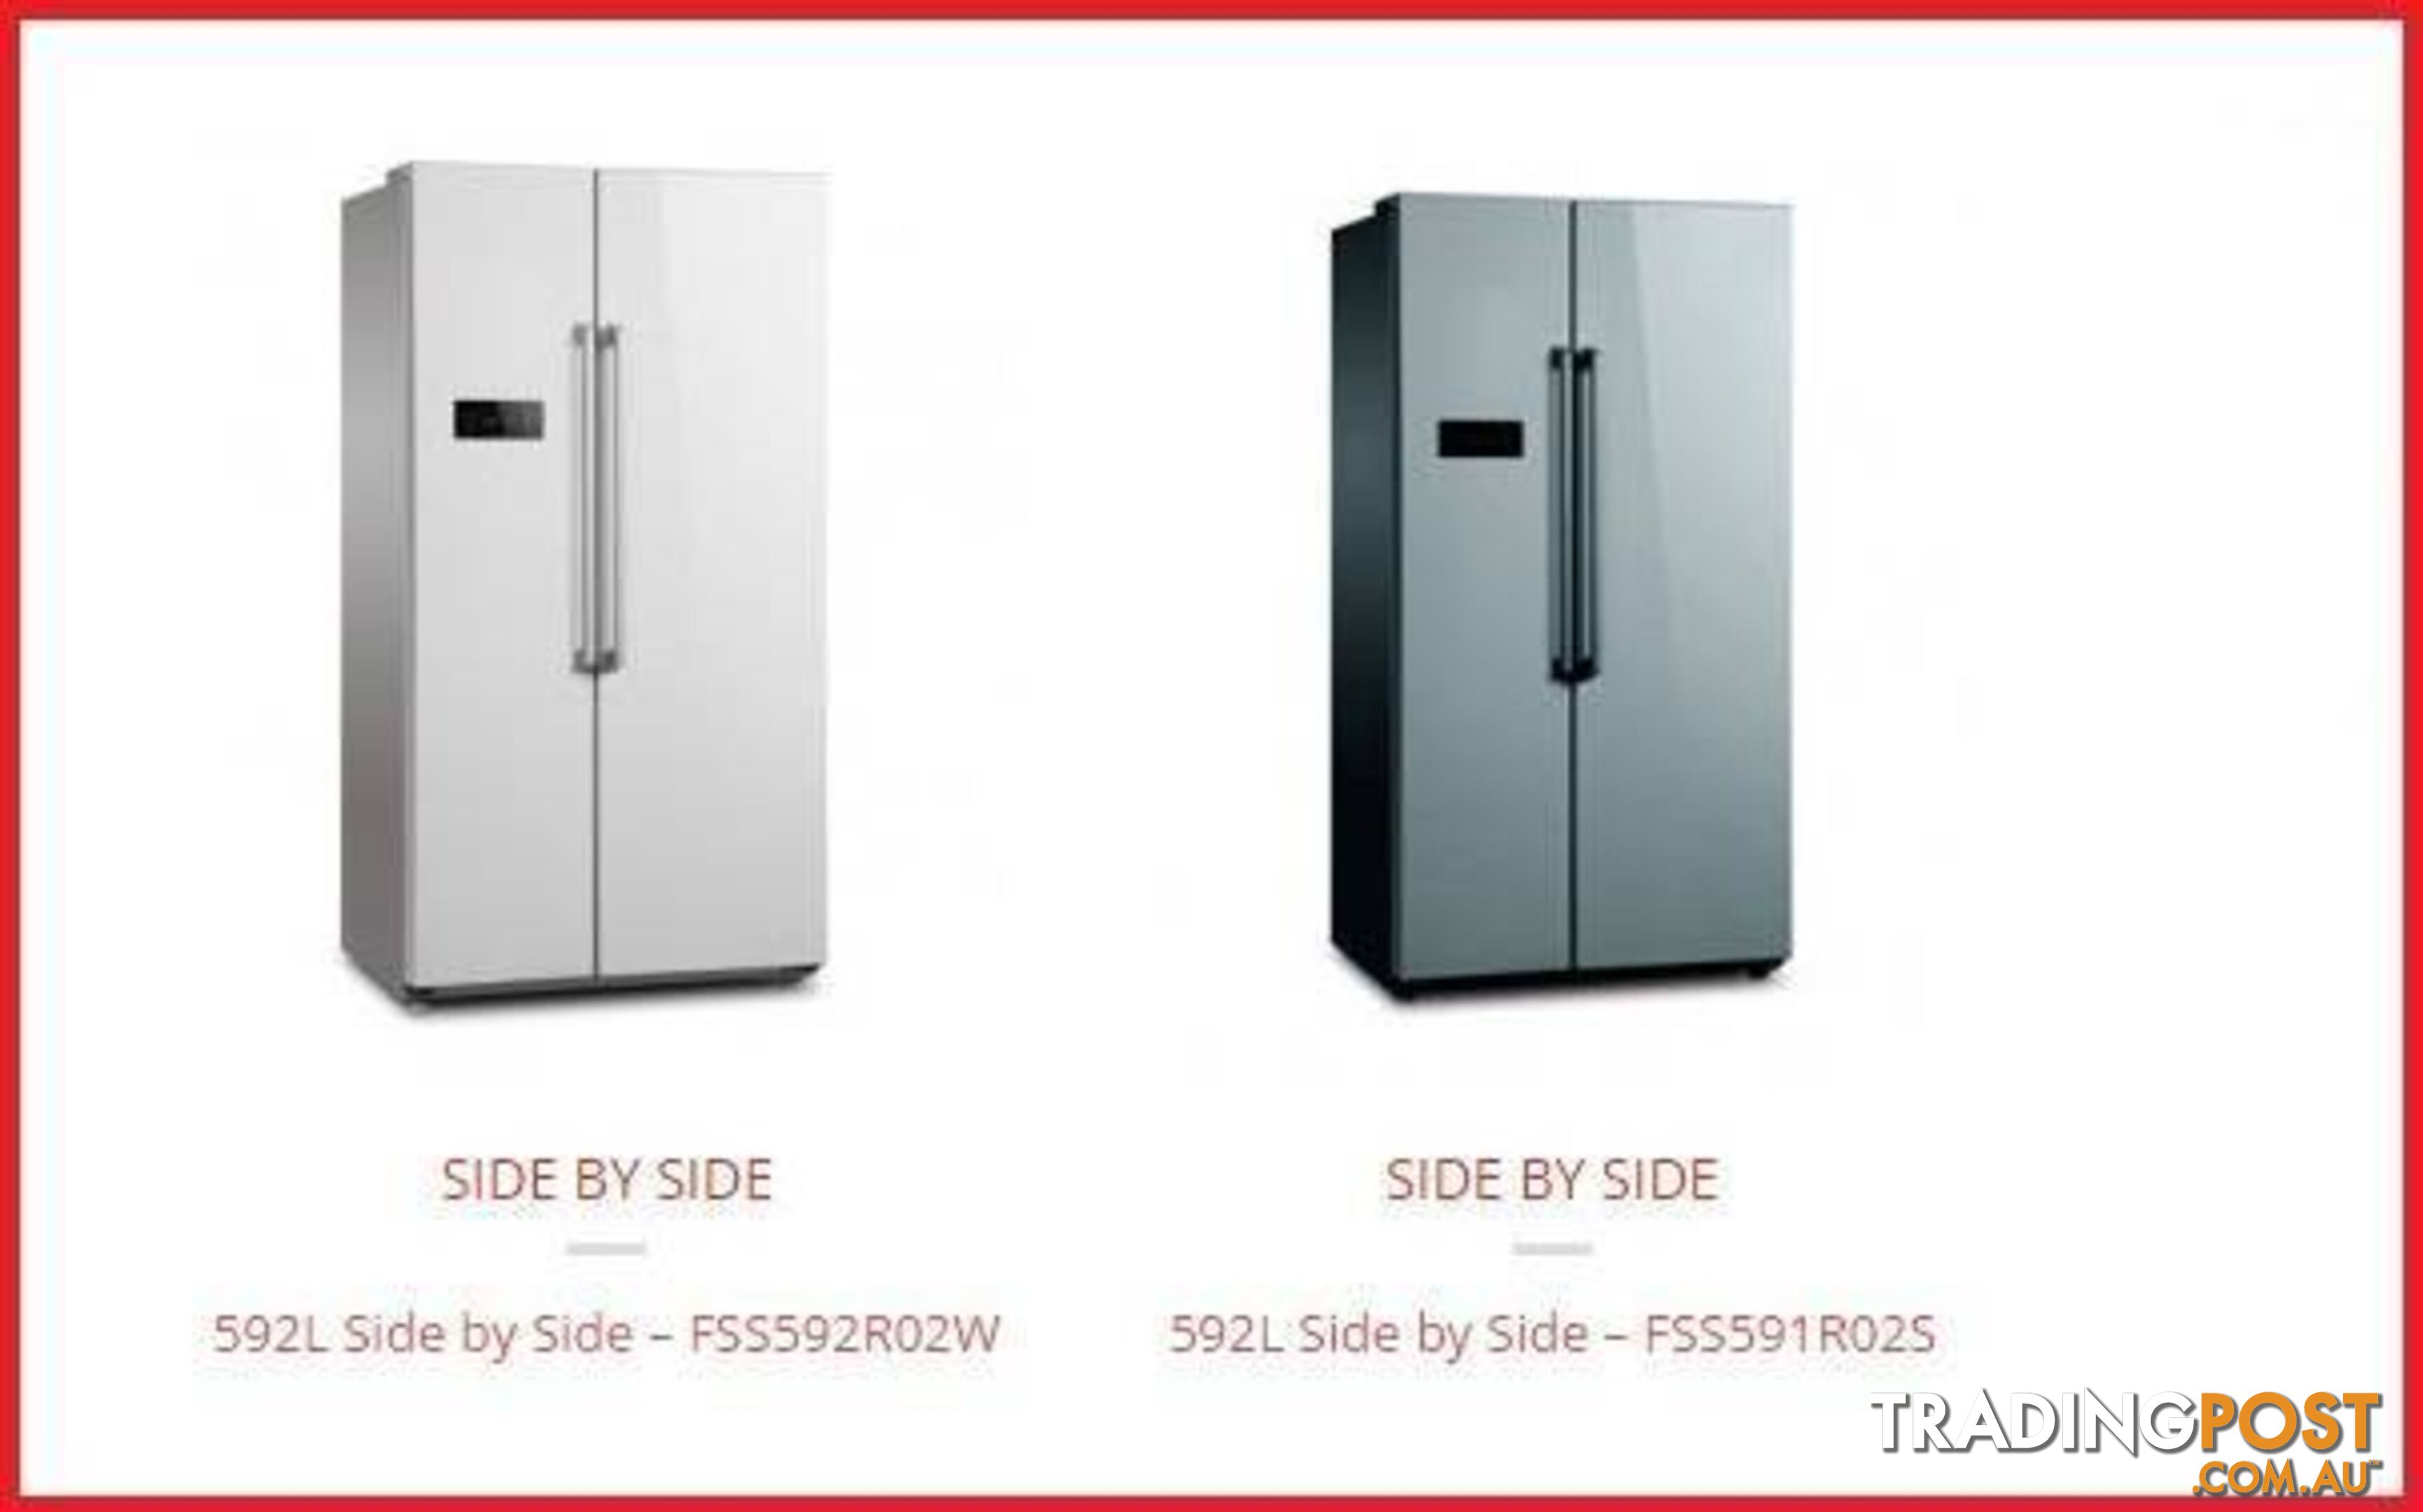 FRIDGES, FREEZERS, TV'S. ALL New In Boxes. Warranty. SAVE 30% OFF